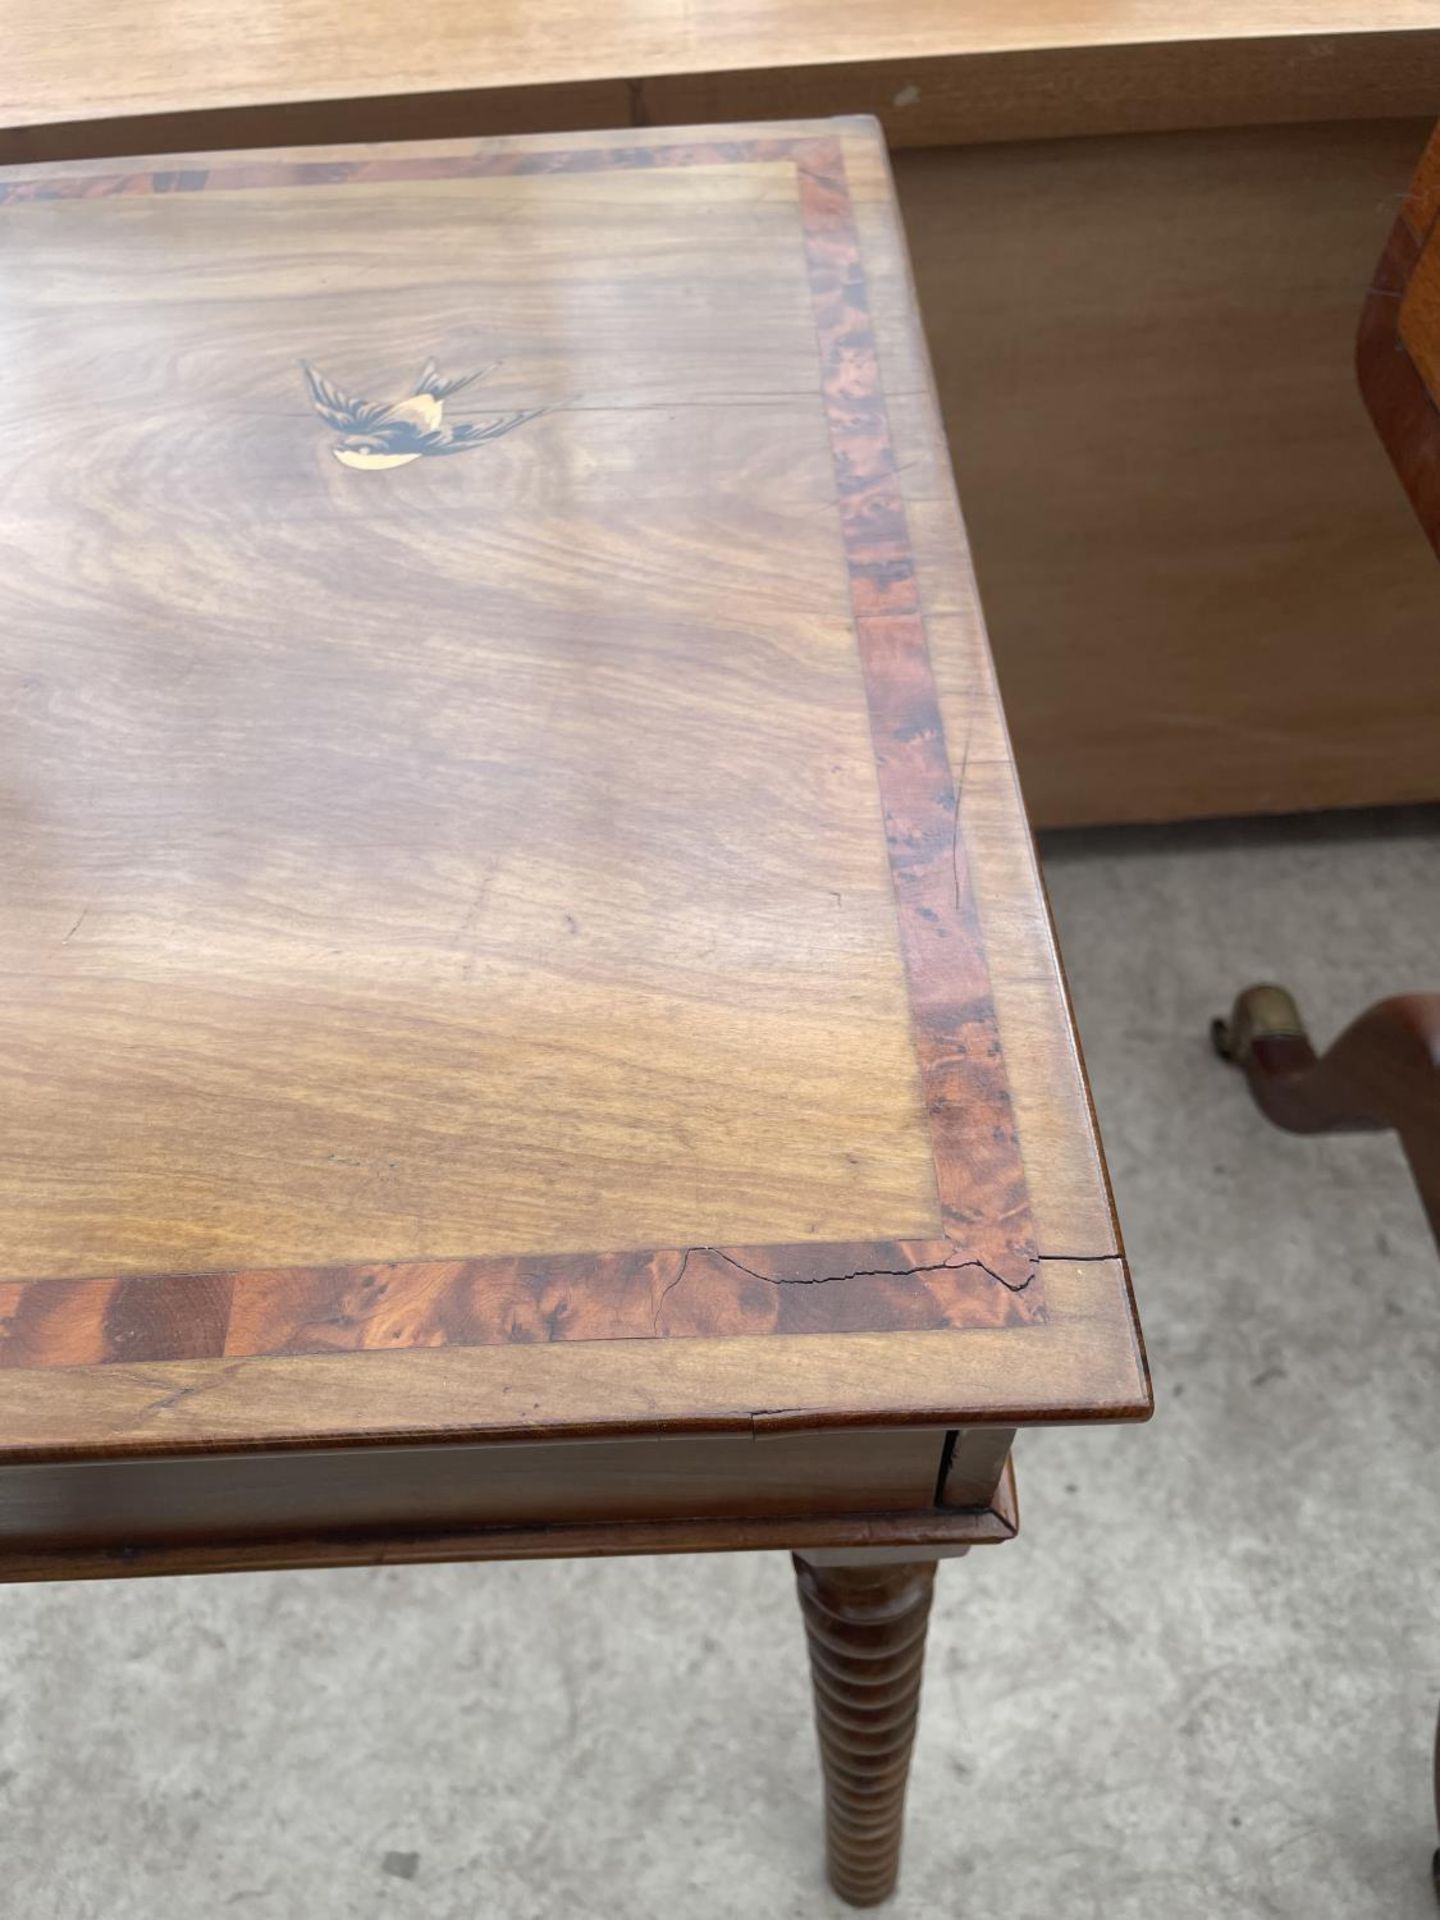 A SMALL WALNUT AND INLAID TABLE WITH SWALLOW DECORATION ON TURNED LEGS WITH SINGLE DRAWER, 22X17.5" - Image 6 of 6